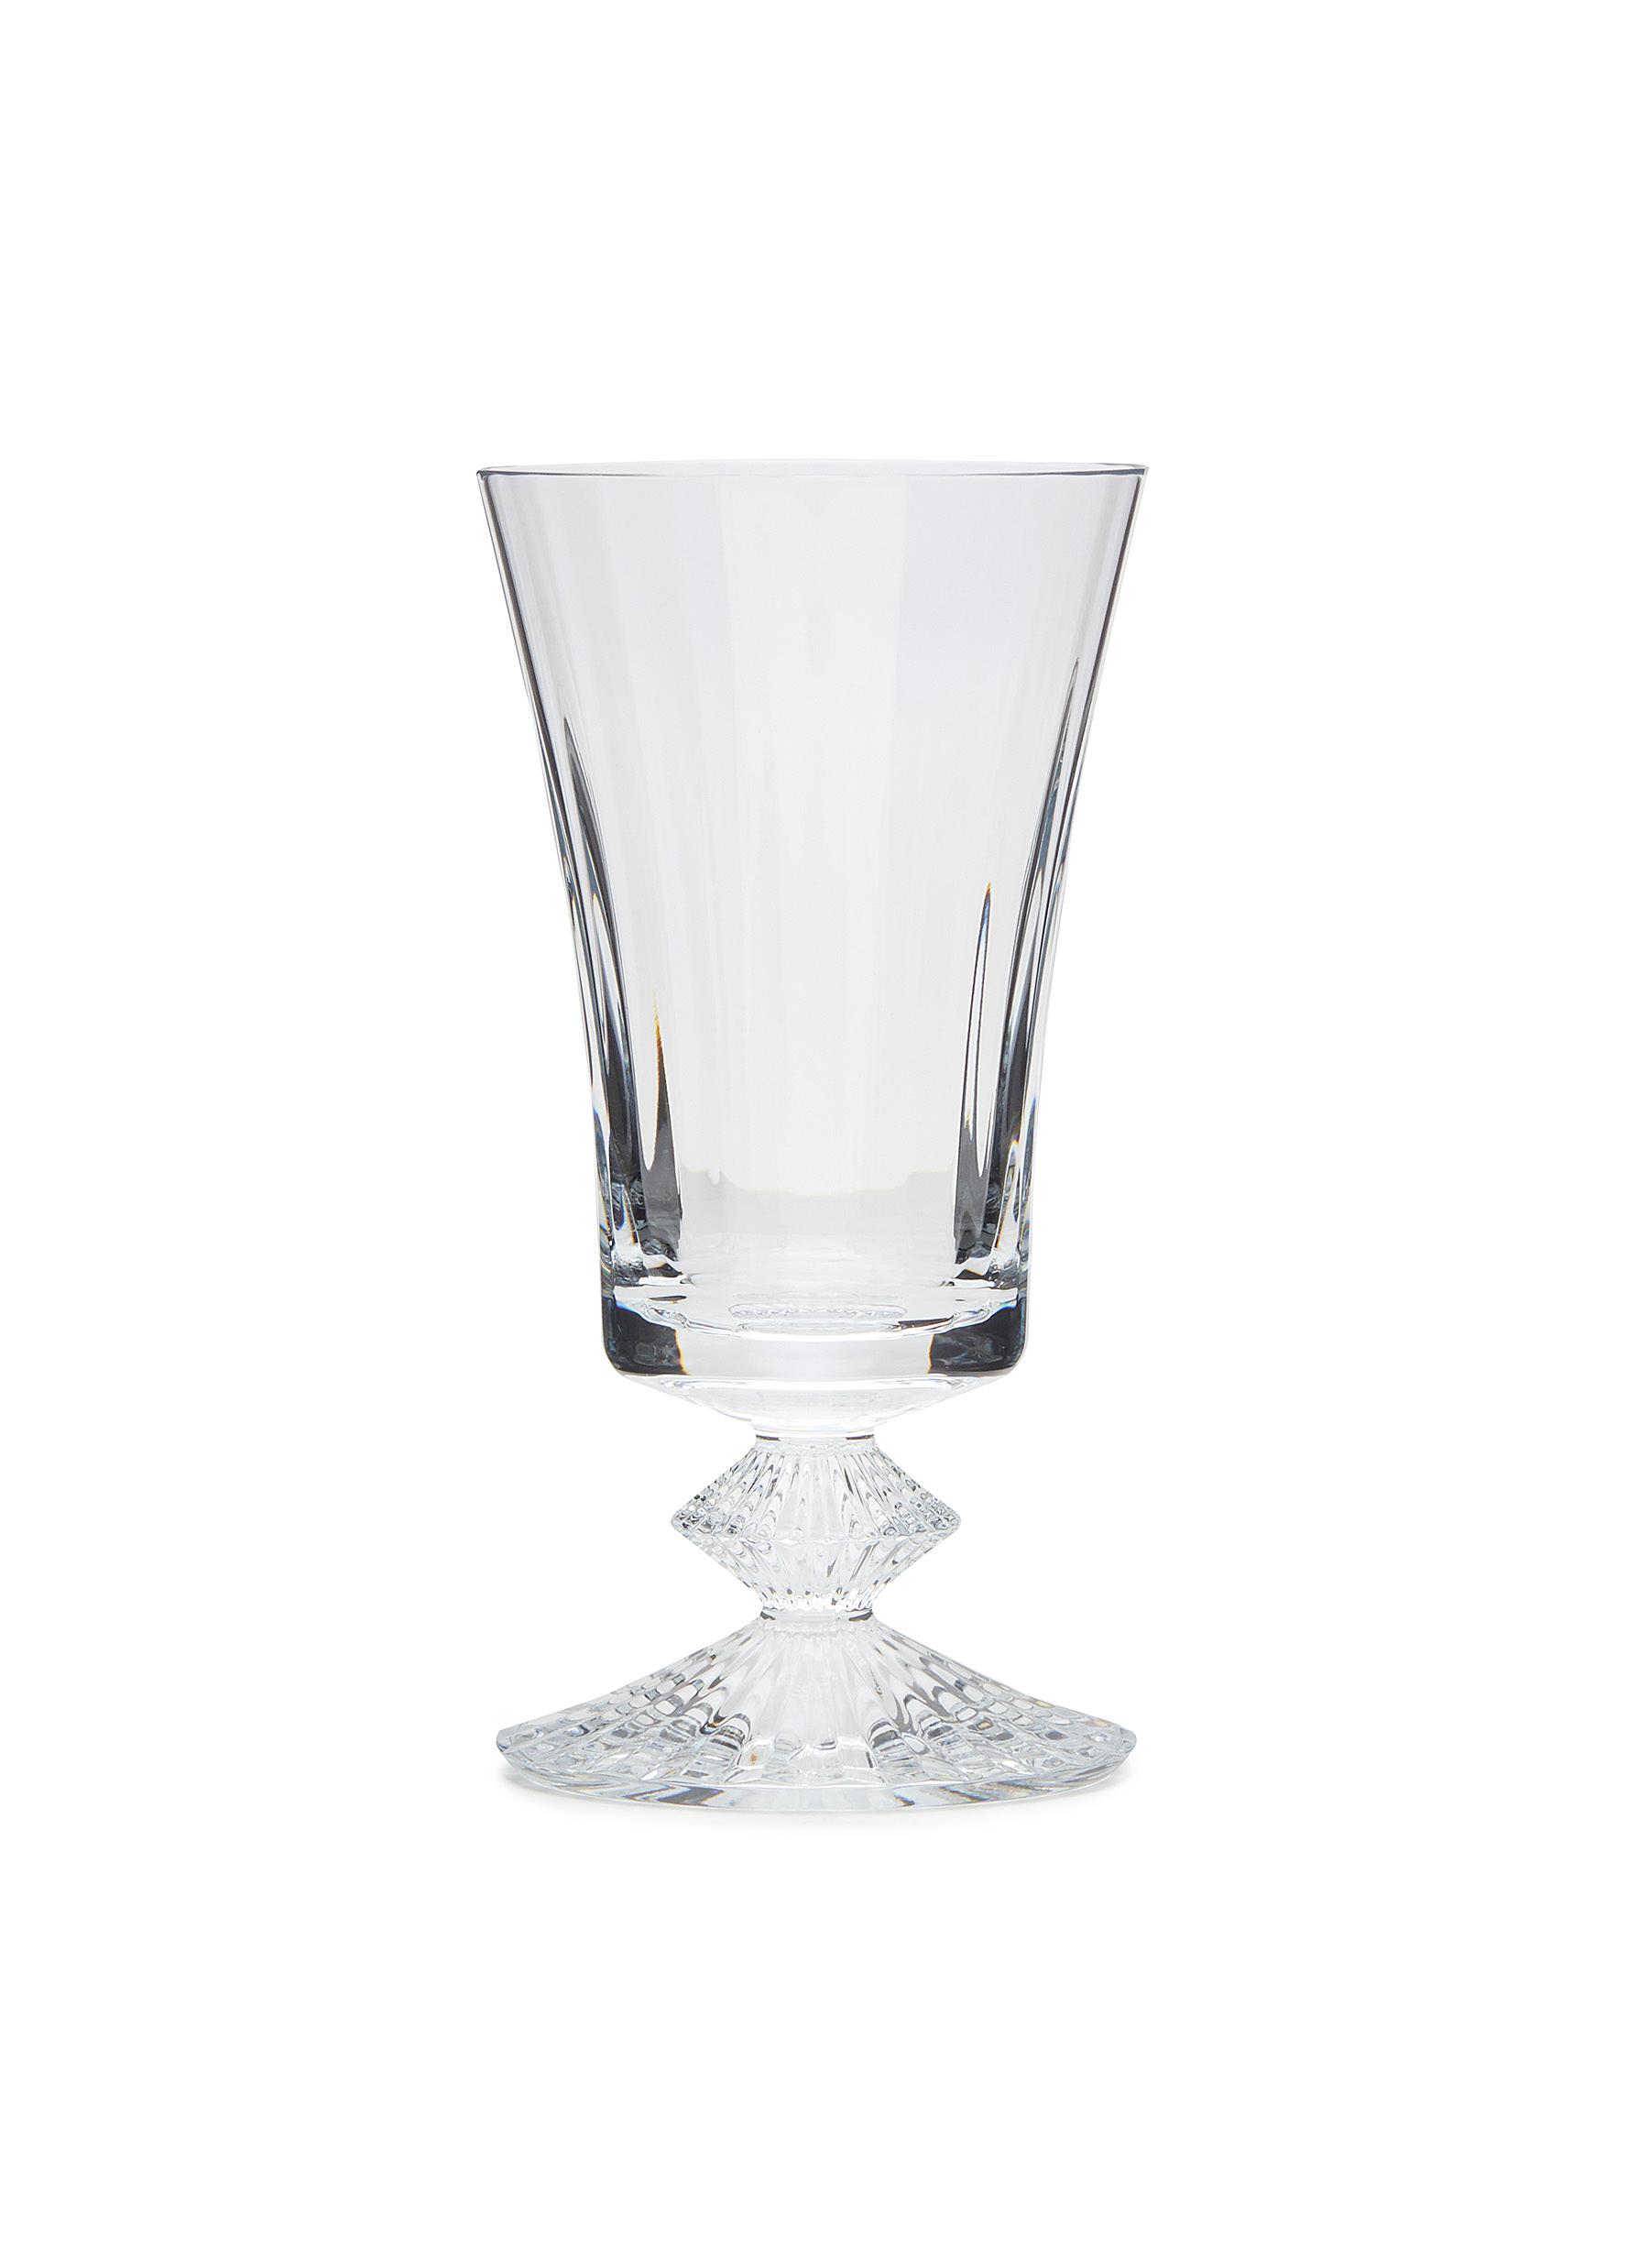 Baccarat Mille Nuits short Red Wine Glass - SCOPELLITI 1887